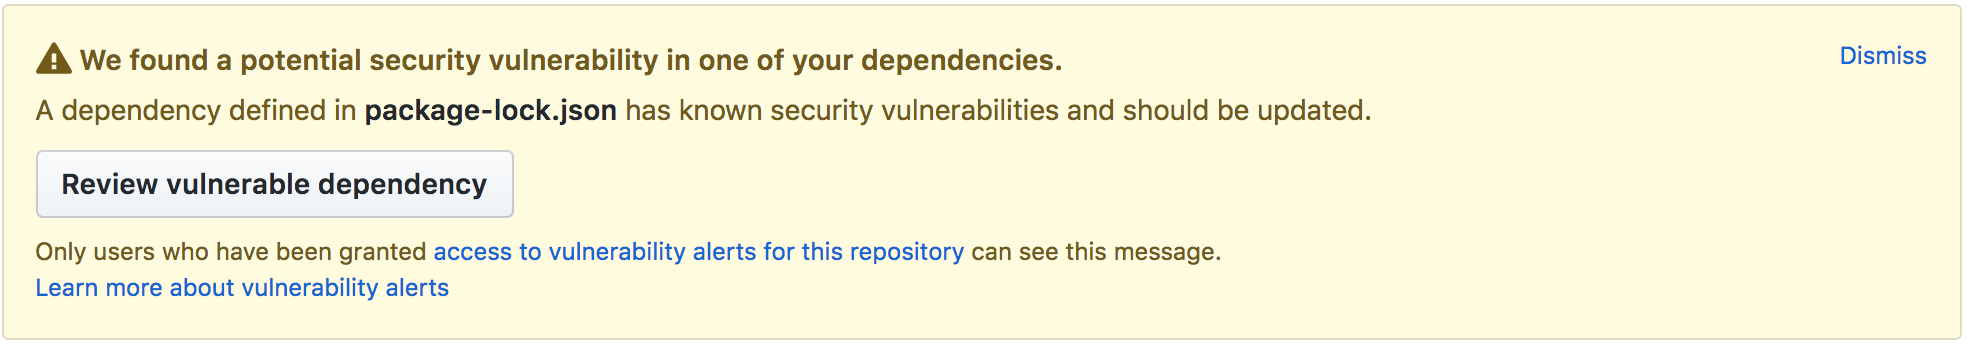 How to fix potential security vulnerability in a dependency defined in package-lock.json